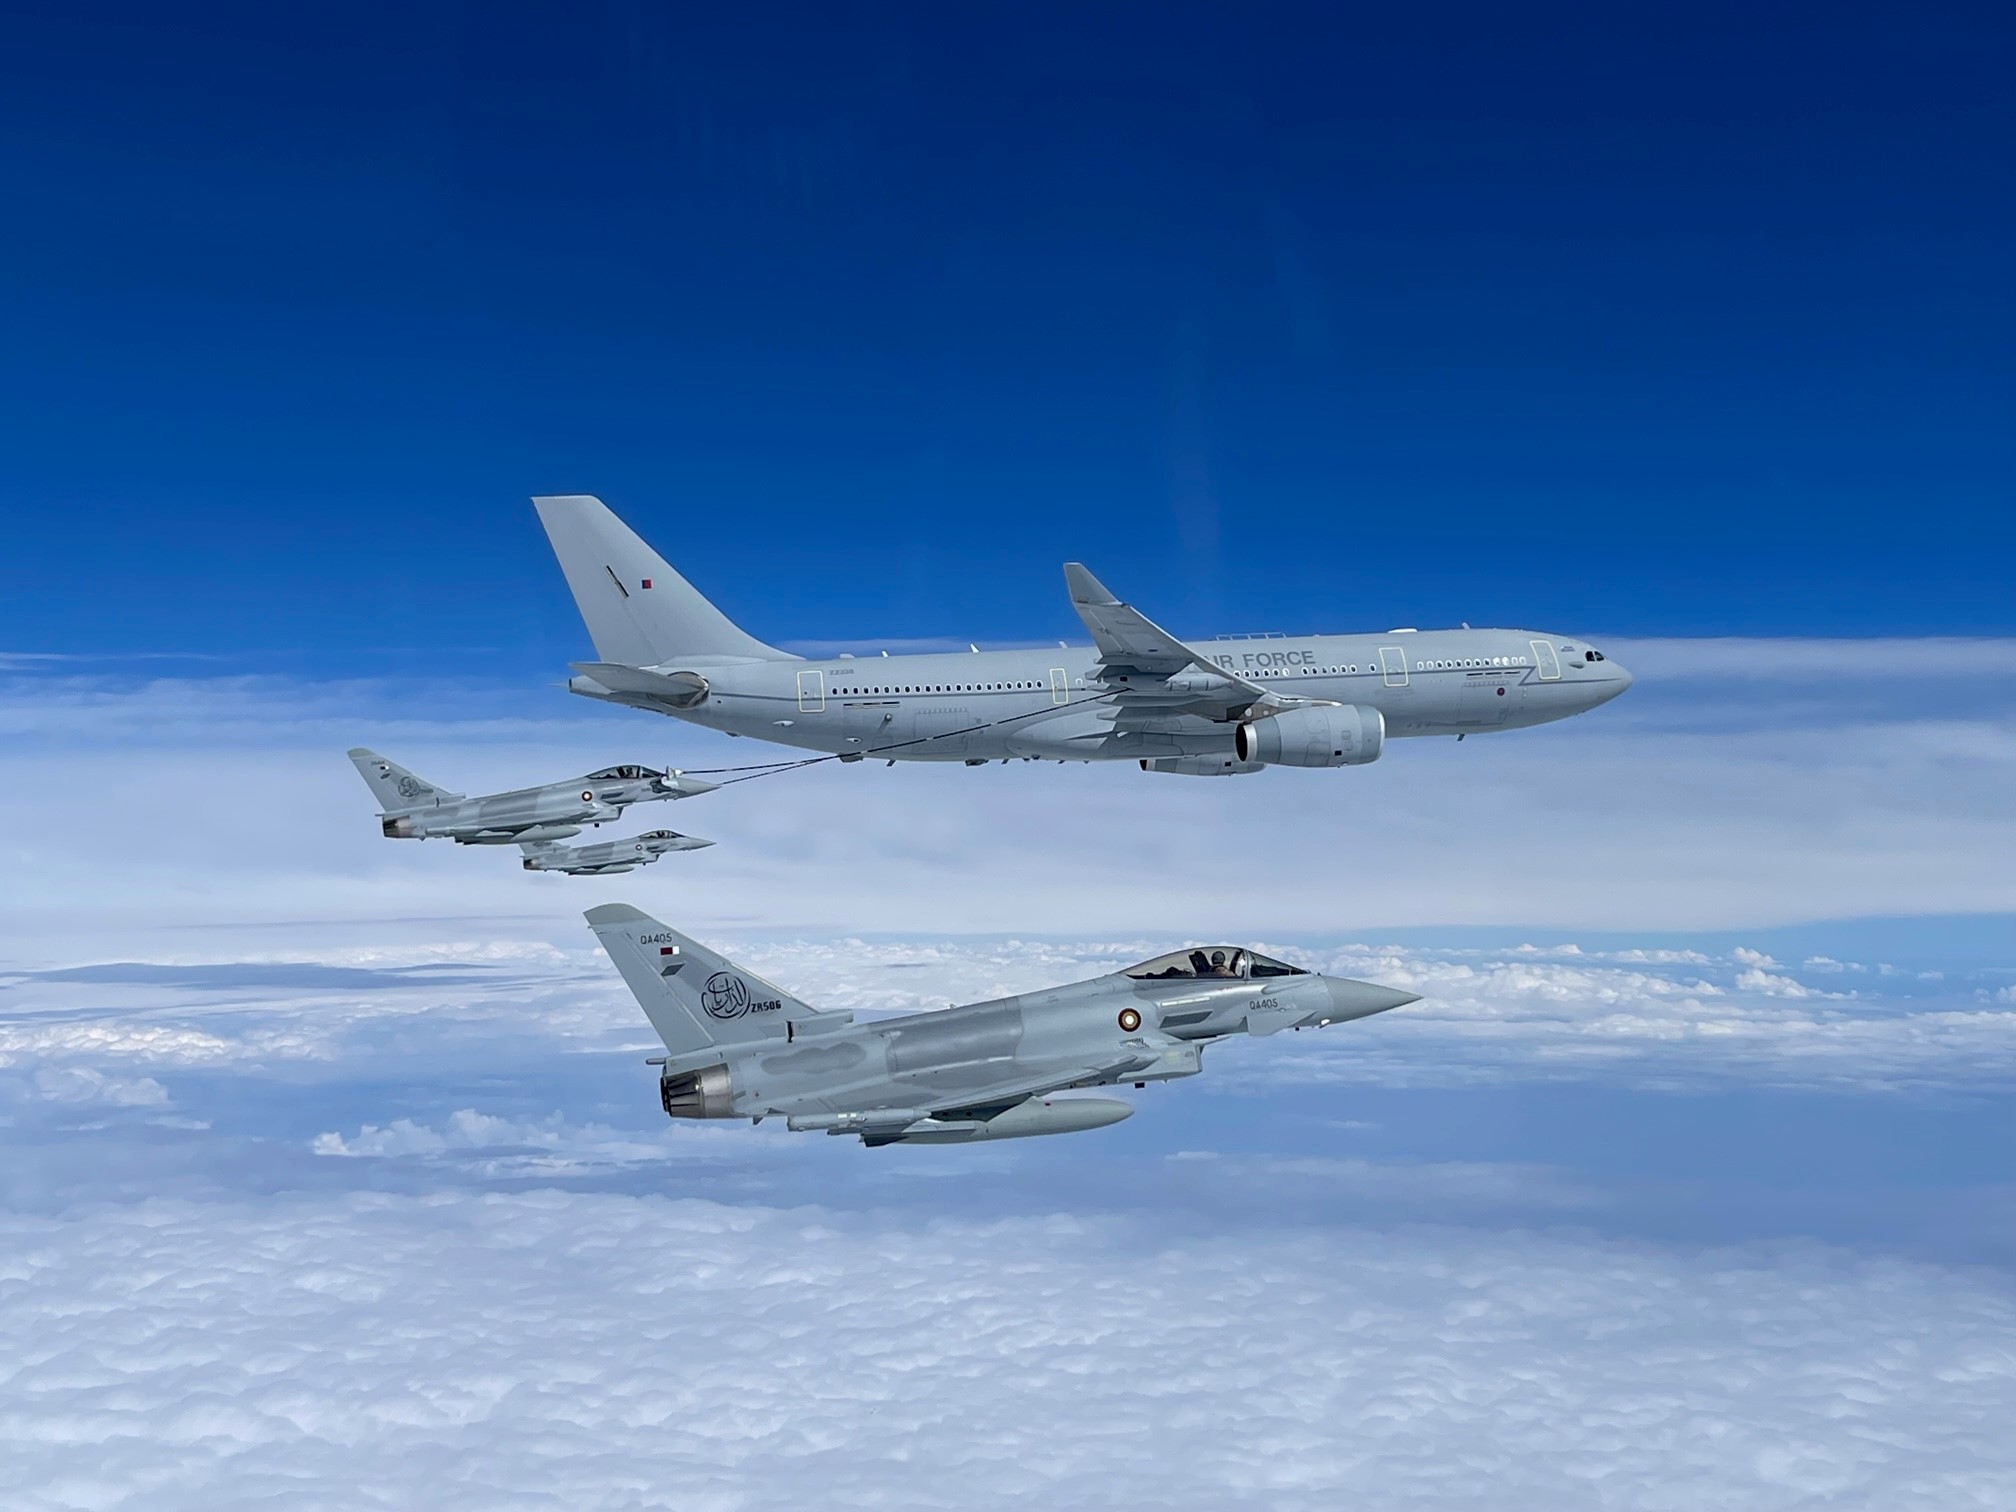  Image shows RAF Voyager and Typhoons during air-to-air refuelling exercise.